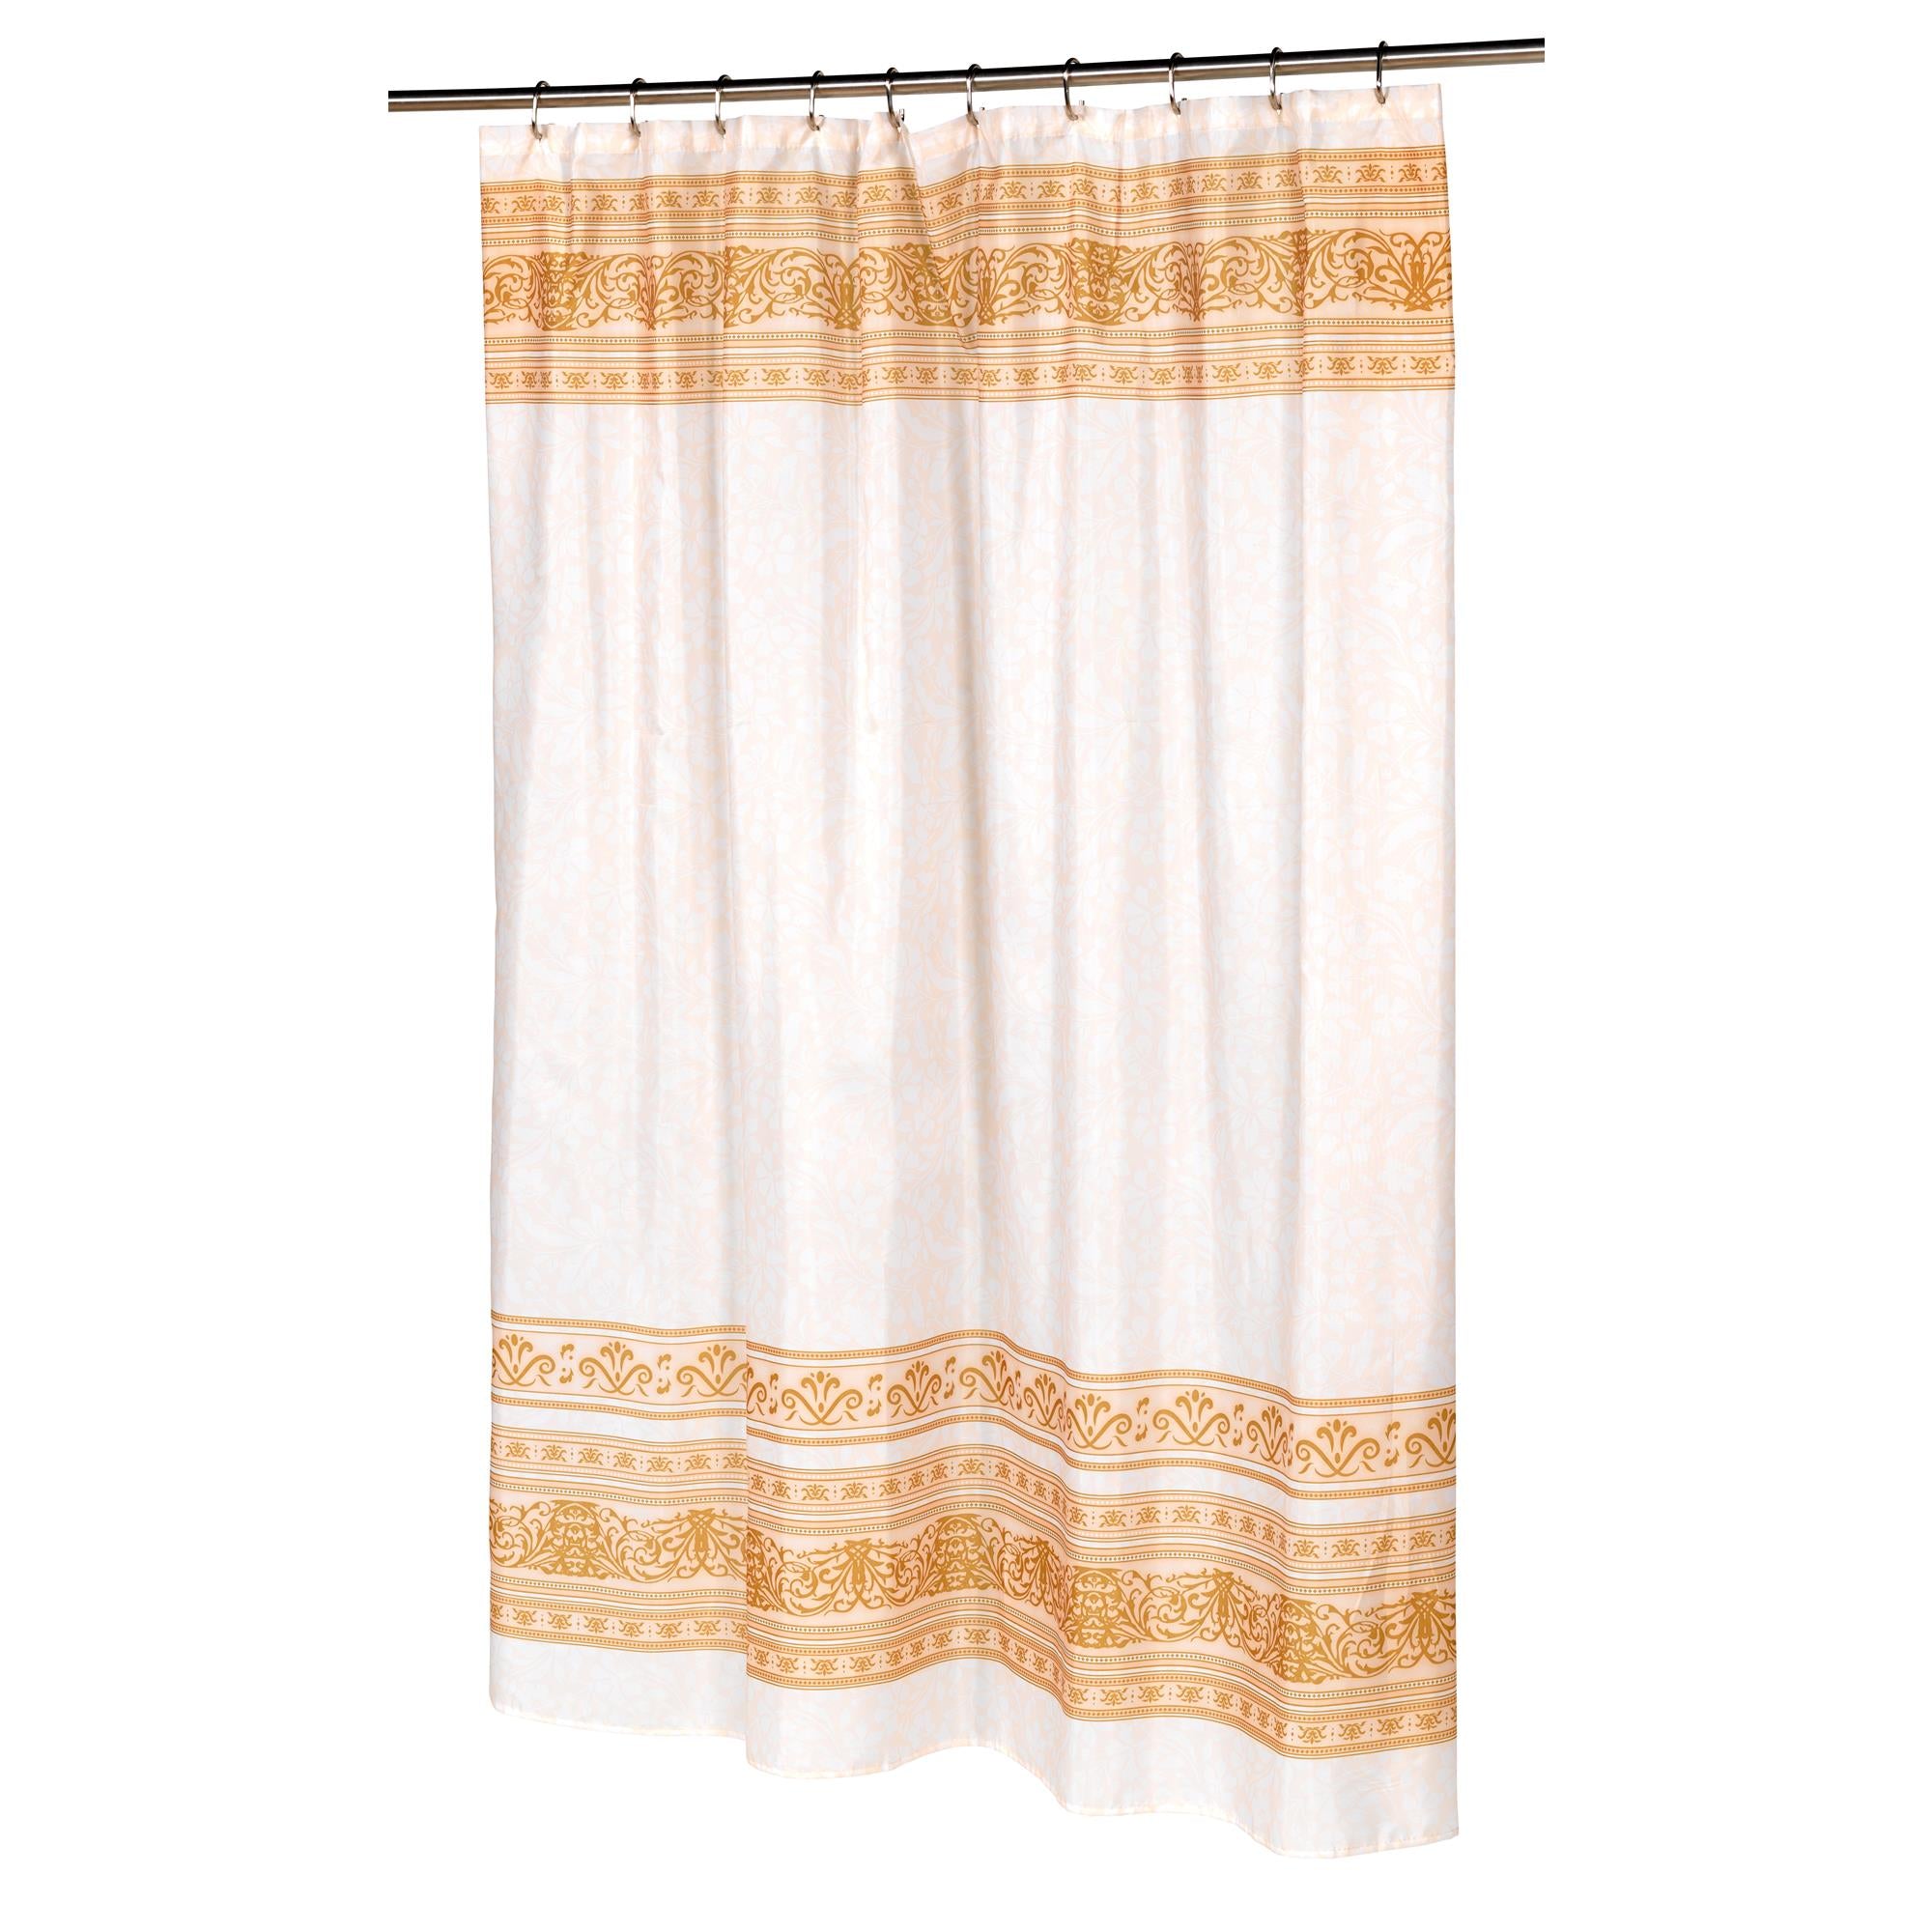 Carnation Home "Fleur" Fabric Shower Curtain in Gold